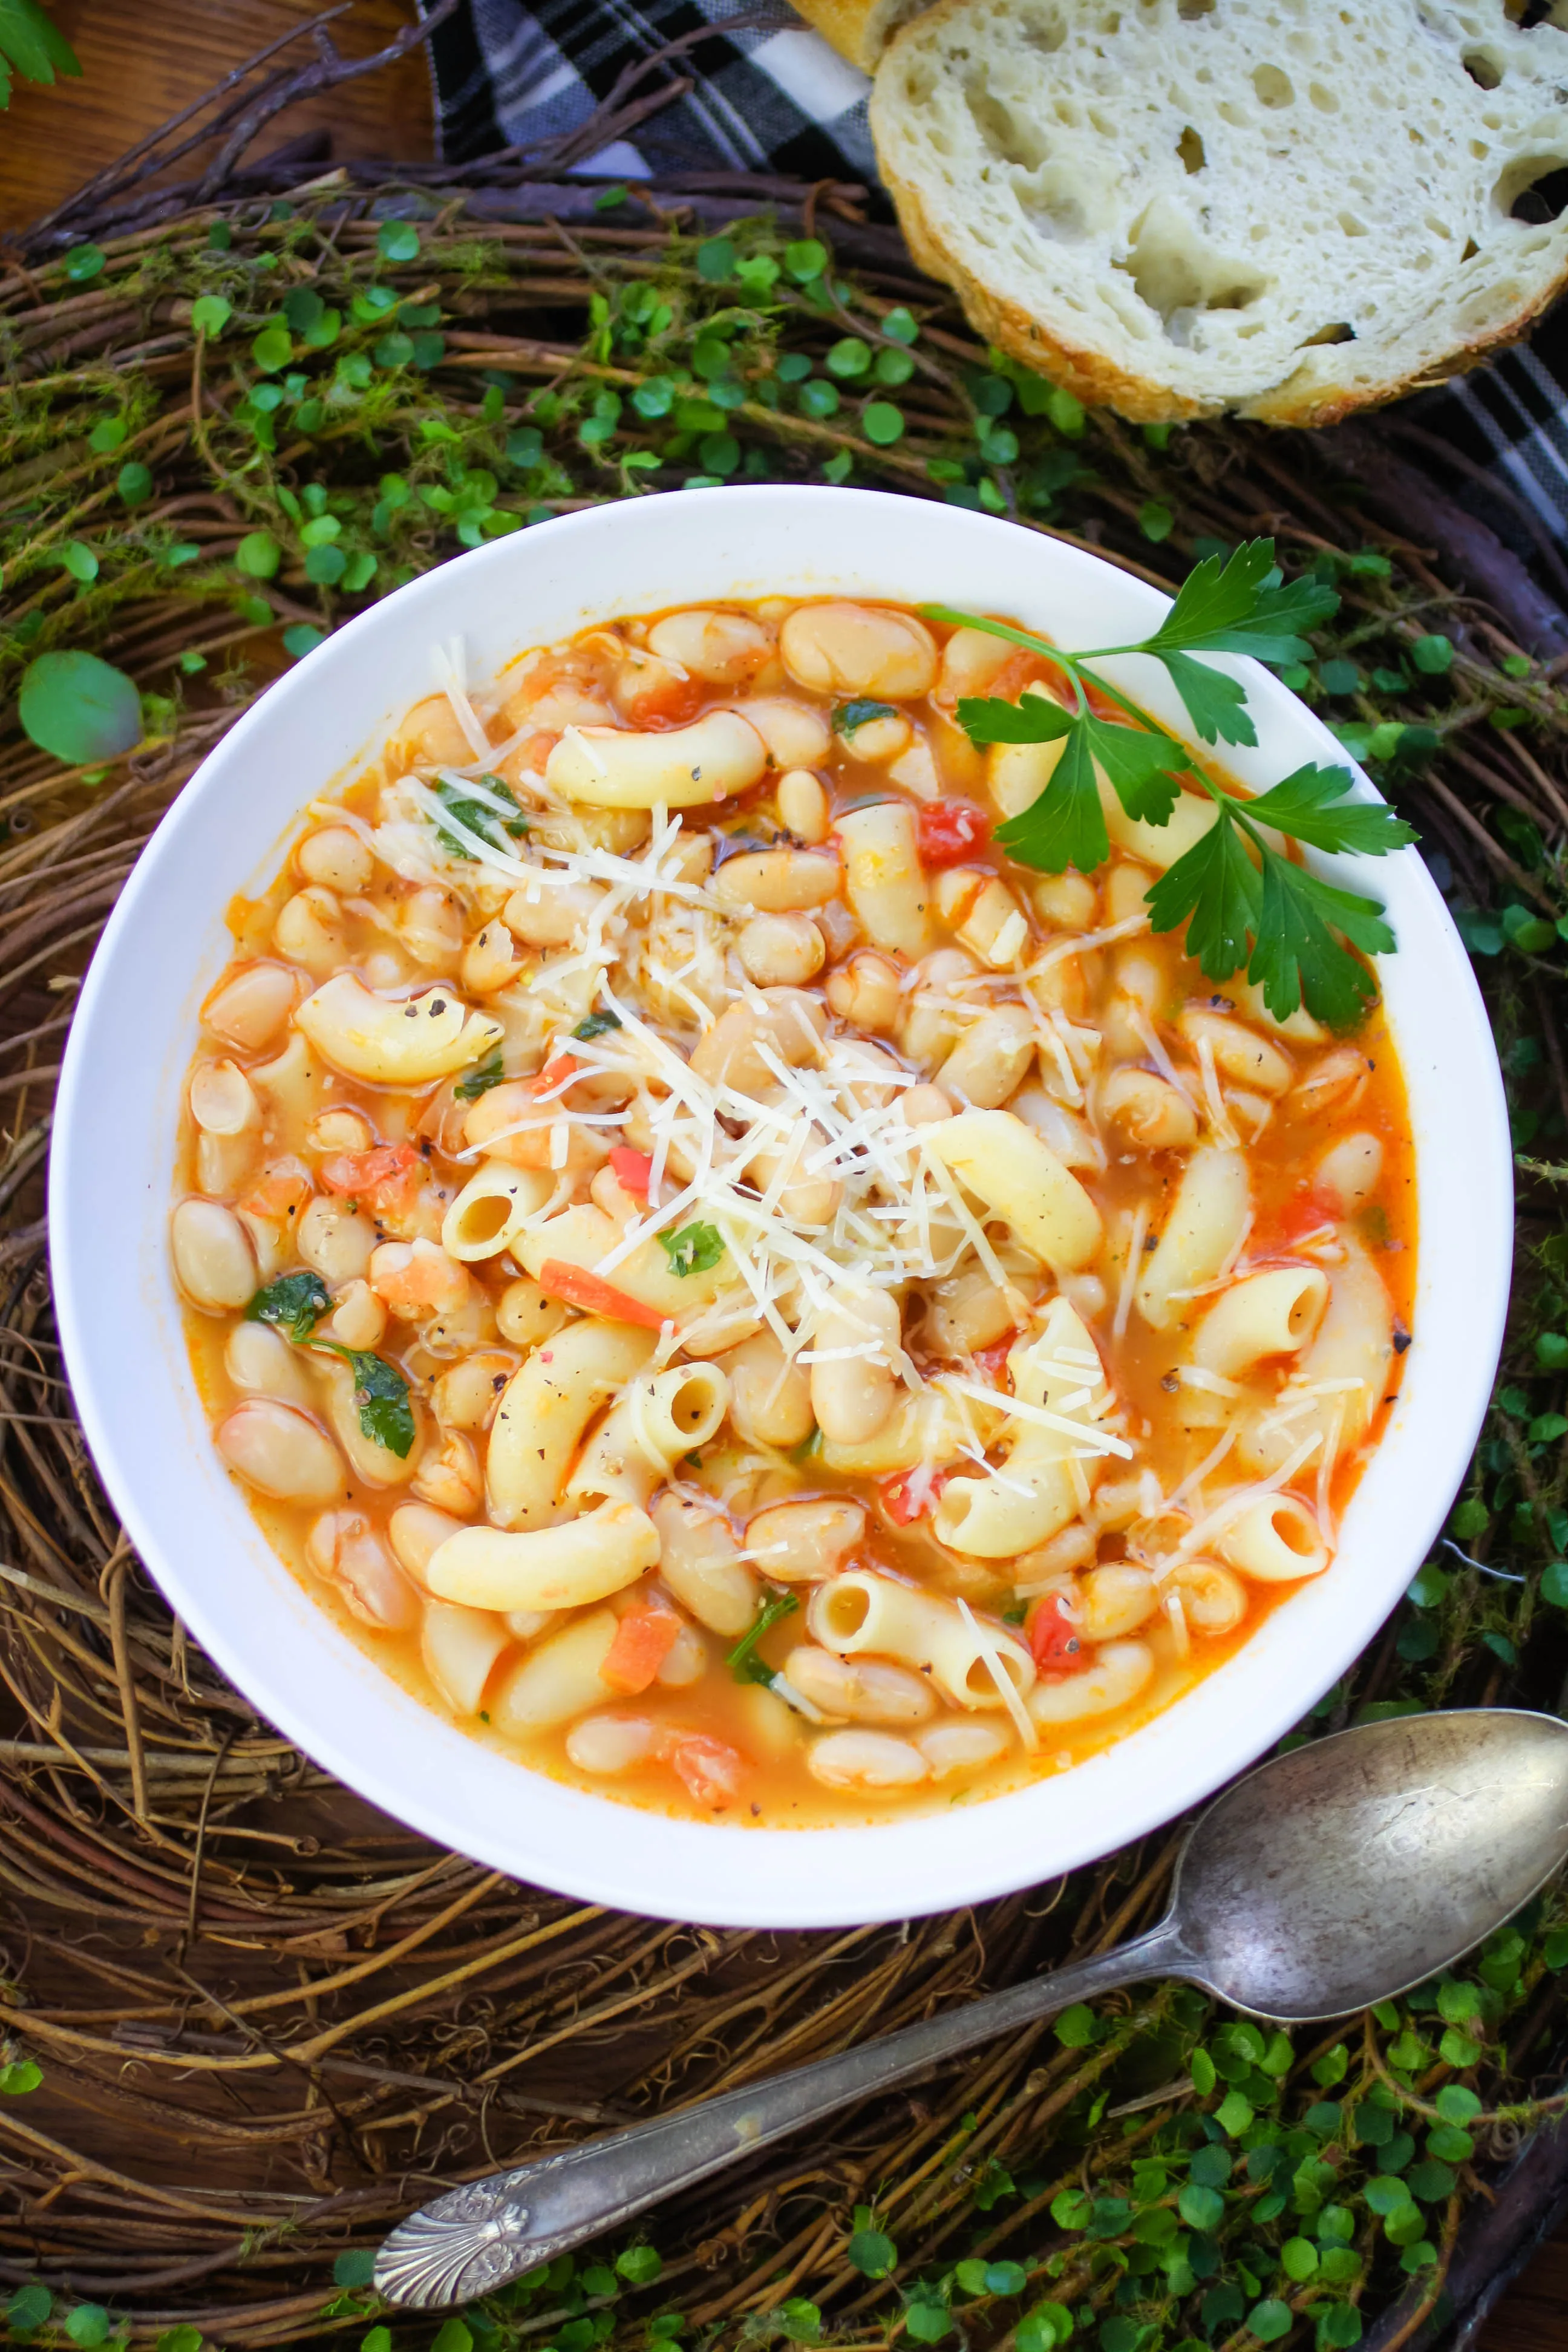 Pasta e Fagioli (Pasta and Beans) is a delicious Italian dish. You'll love how easy it is to make Pasta e Fagioli (Pasta and Beans).